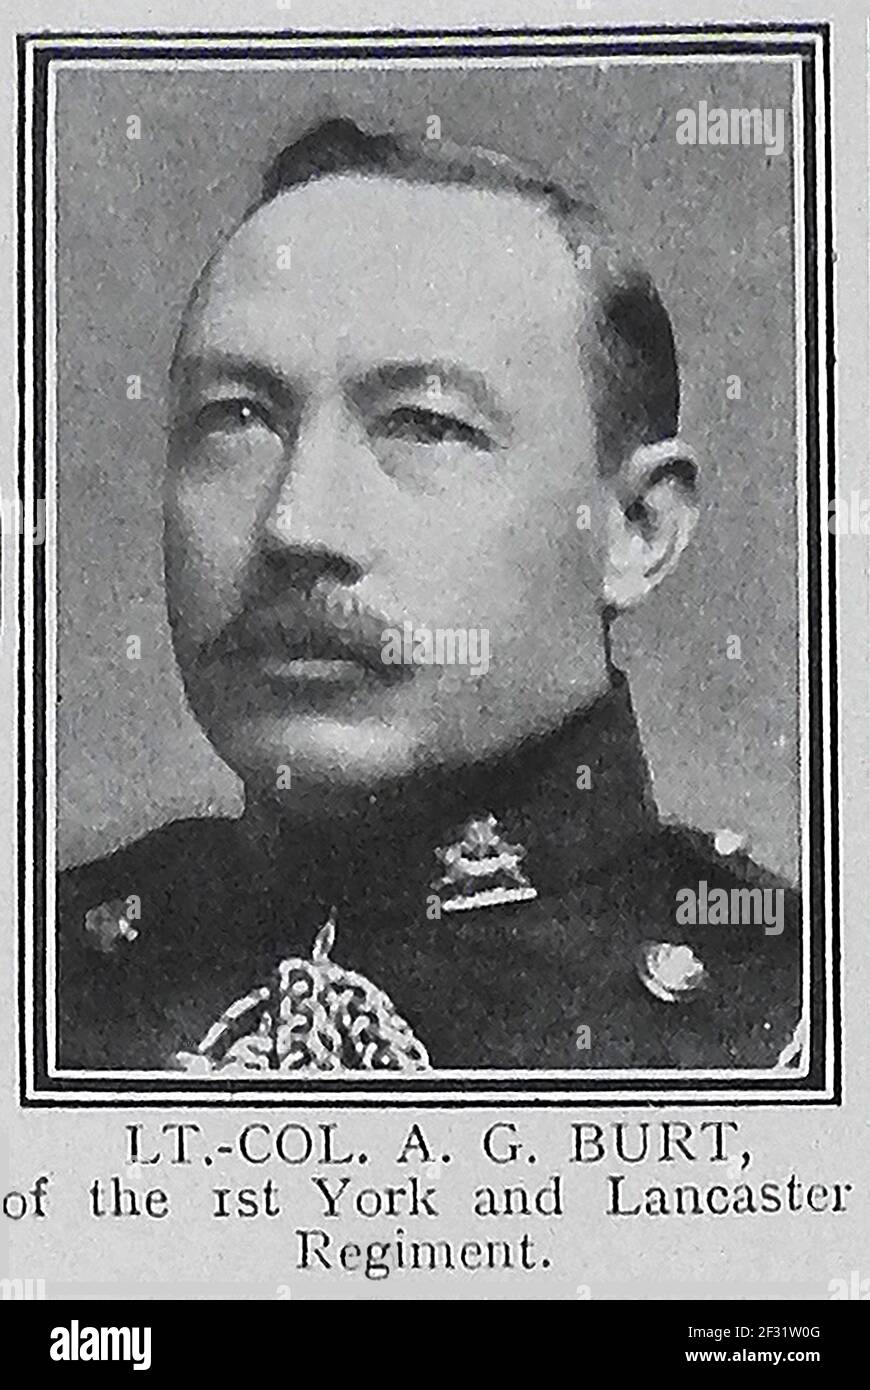 LIEUTENANT COLONEL  A G BURT of the 1st York & Lancaster Regiment.   - A printed portrait from a 1914-1915 role of honour page of those killed in action in World War One. Stock Photo